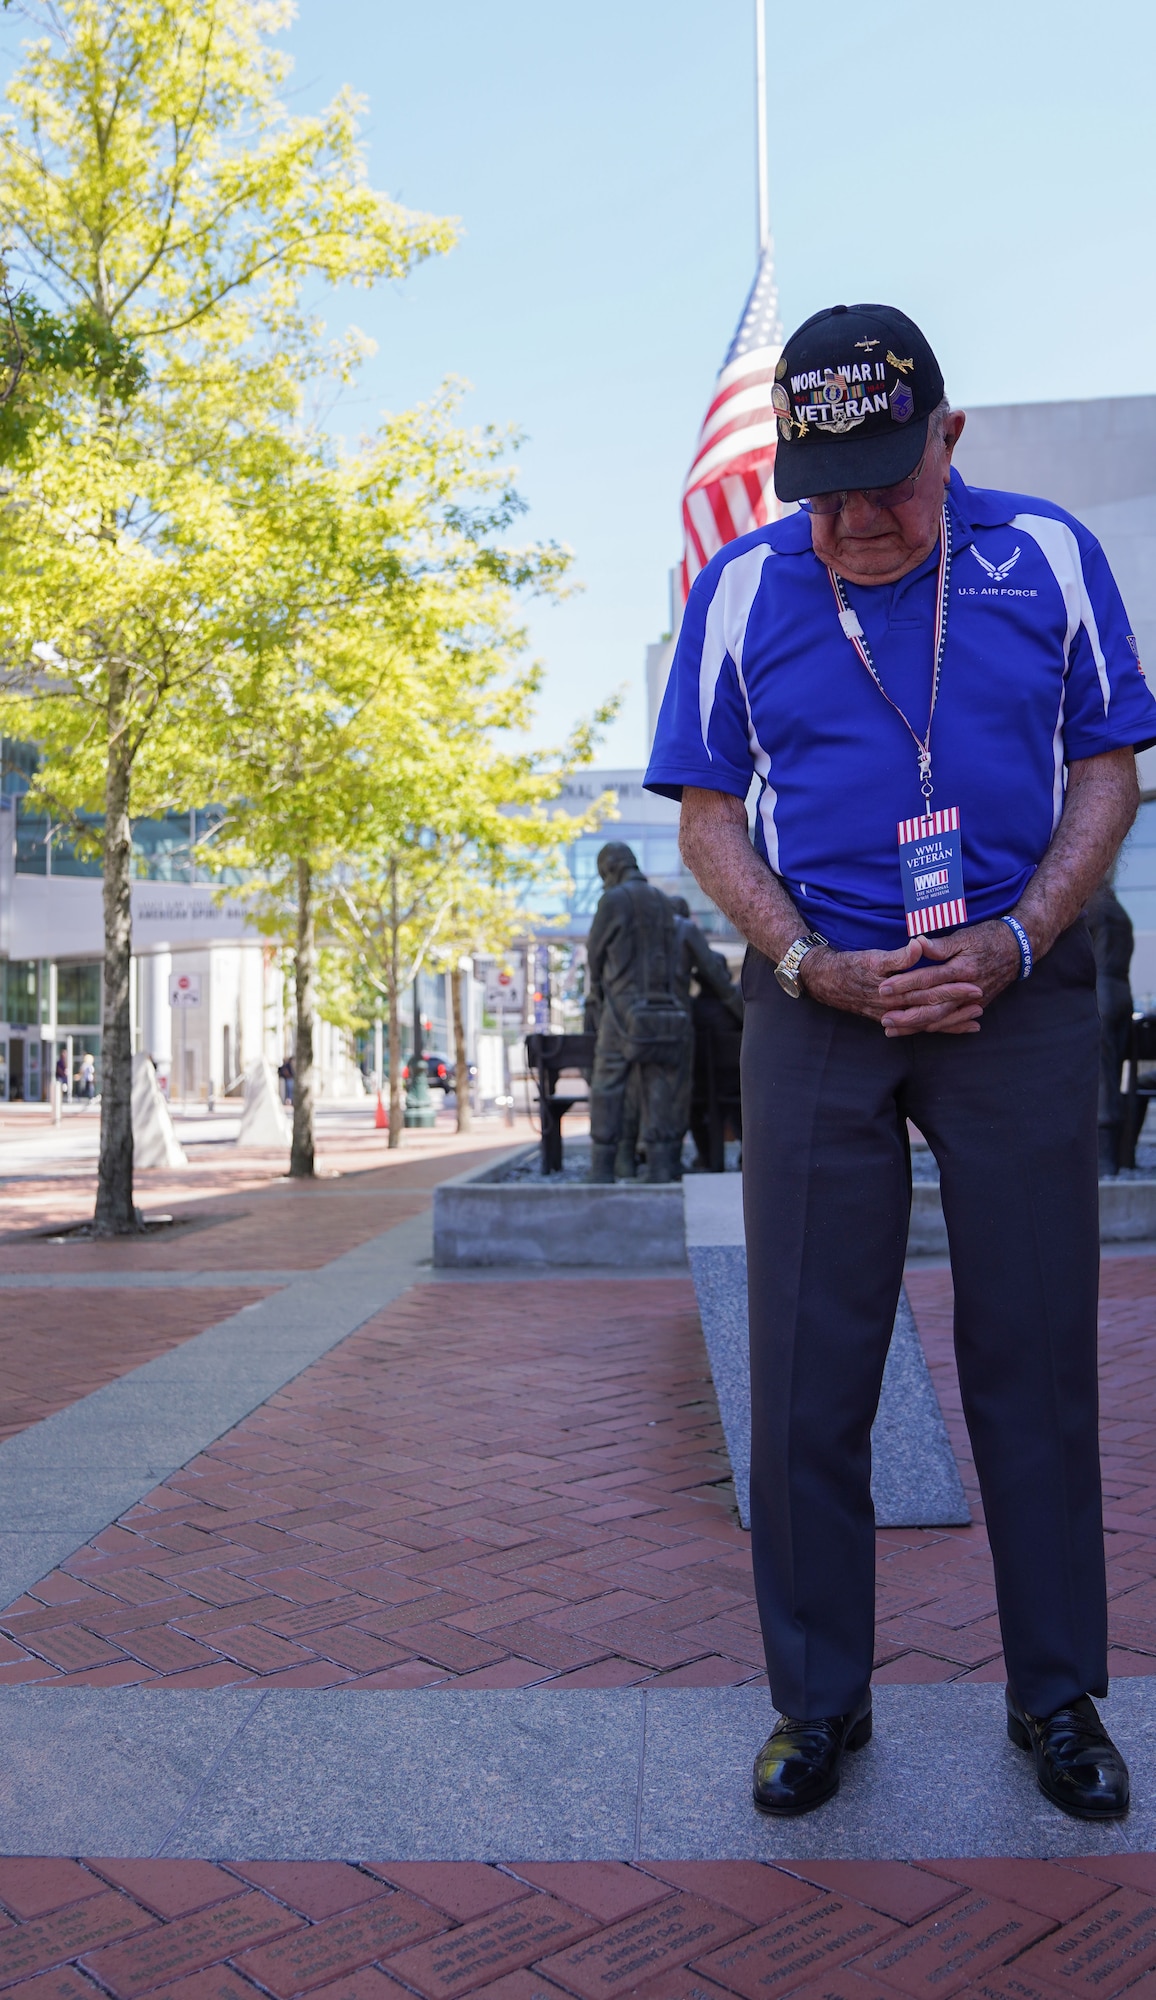 Retired U.S. Army Air Forces Chief Master Sgt. Mel Jenner, 452nd Bomber Group radio operator, looks down at his commemorative brick for the first time at the National World War II Museum, New Orleans, Louisiana, Sept. 14, 2022. Jenner’s late first wife purchased a commemorative brick to honor his military service. Jenner began his 26 year military career by training as a radio operator at what was then known as Keesler Army Airfield. (U.S. Air Force photo by Airman 1st Class Elizabeth Davis)